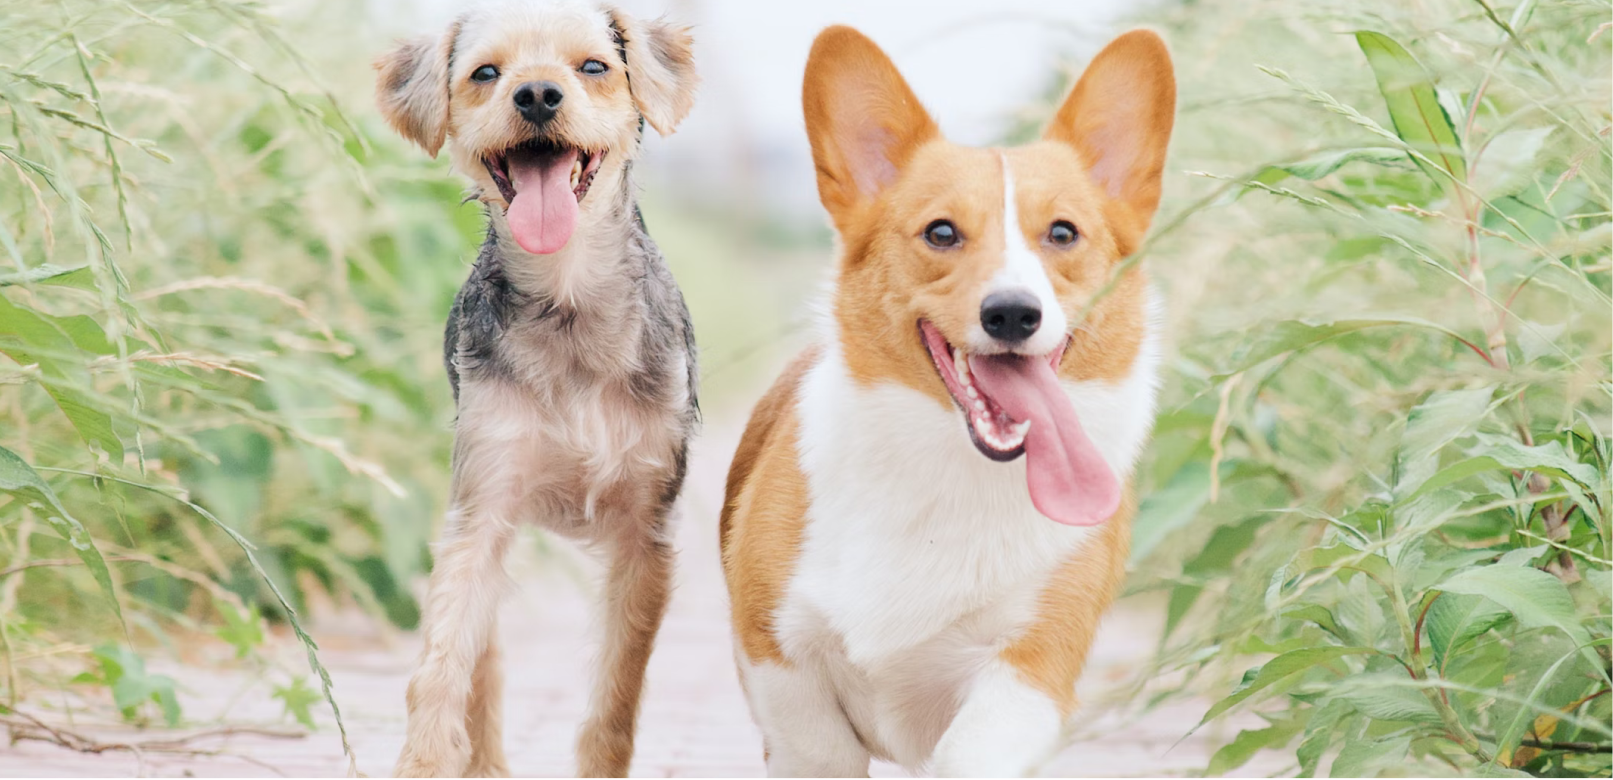 What Is The Most Playful Dog Breed?